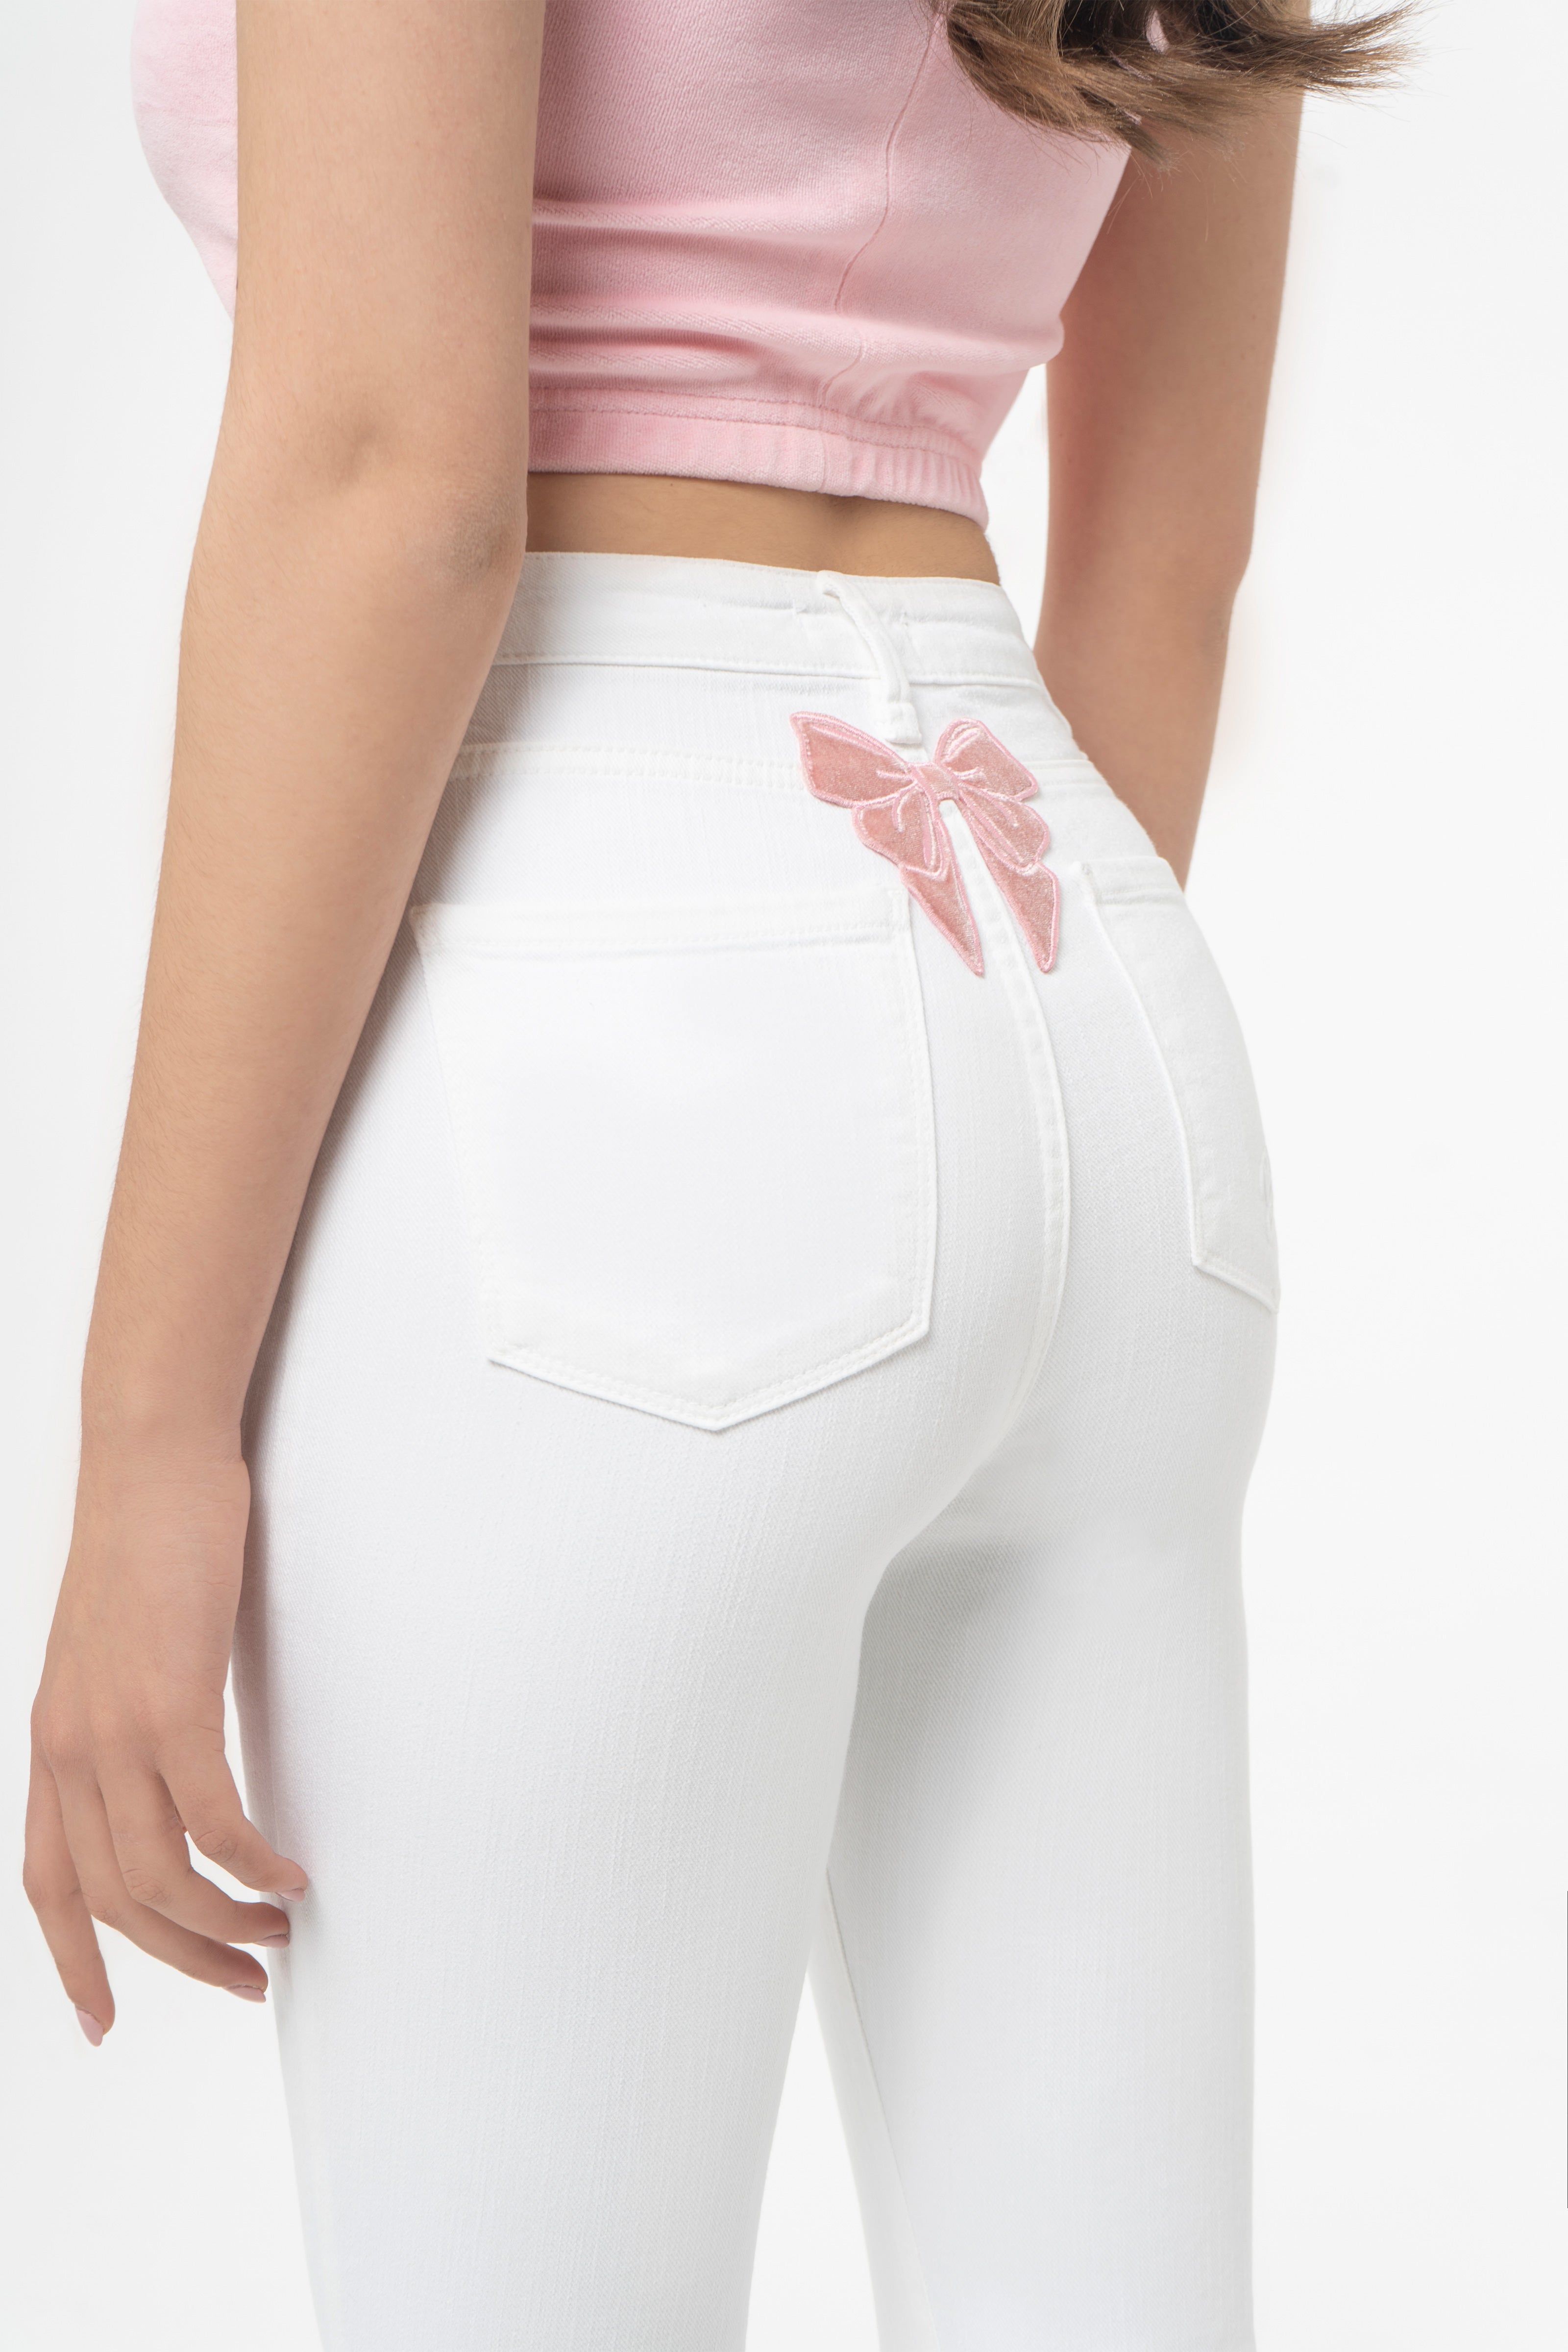 Iconic Jeans White High Waist